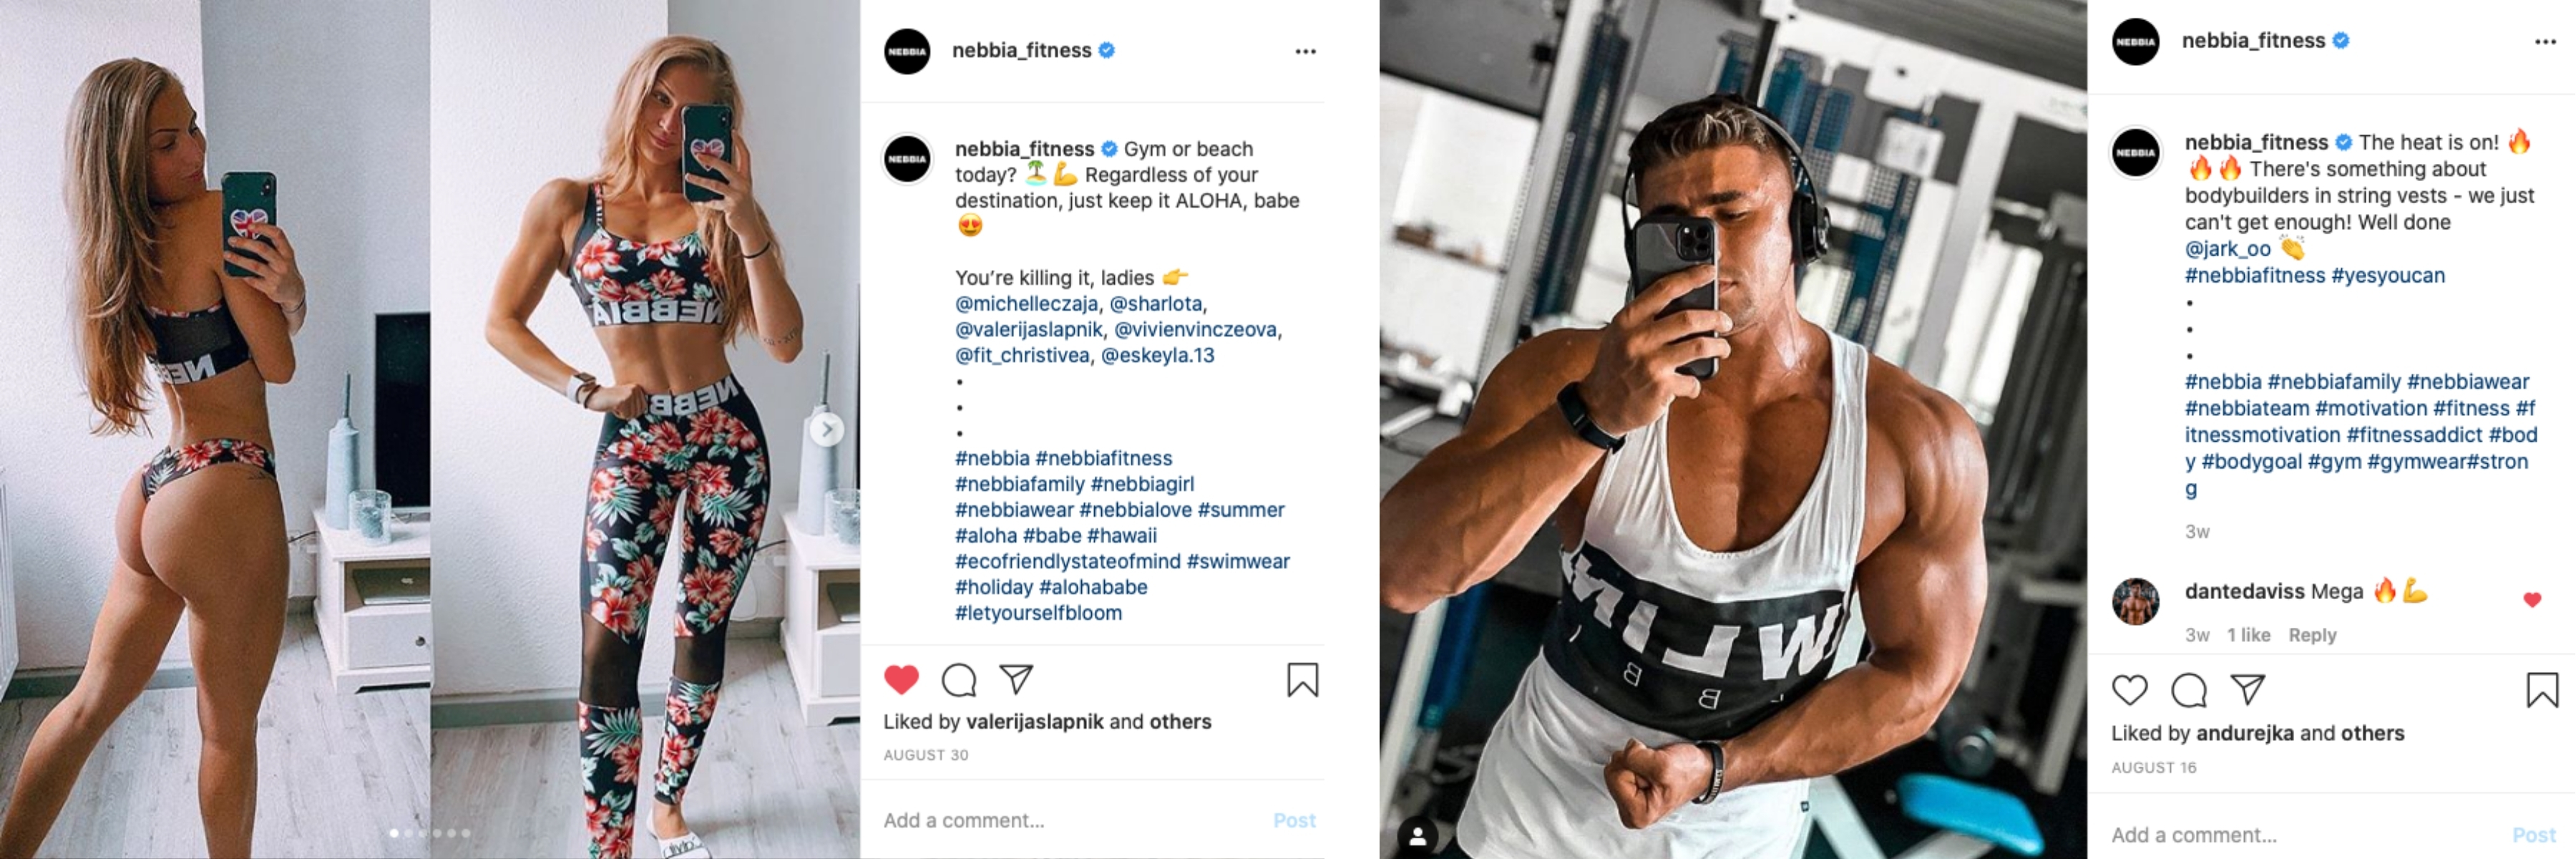 People Who Repeatedly Post Their Workouts On Social Media Have Narcissistic  Traits, According to New Study